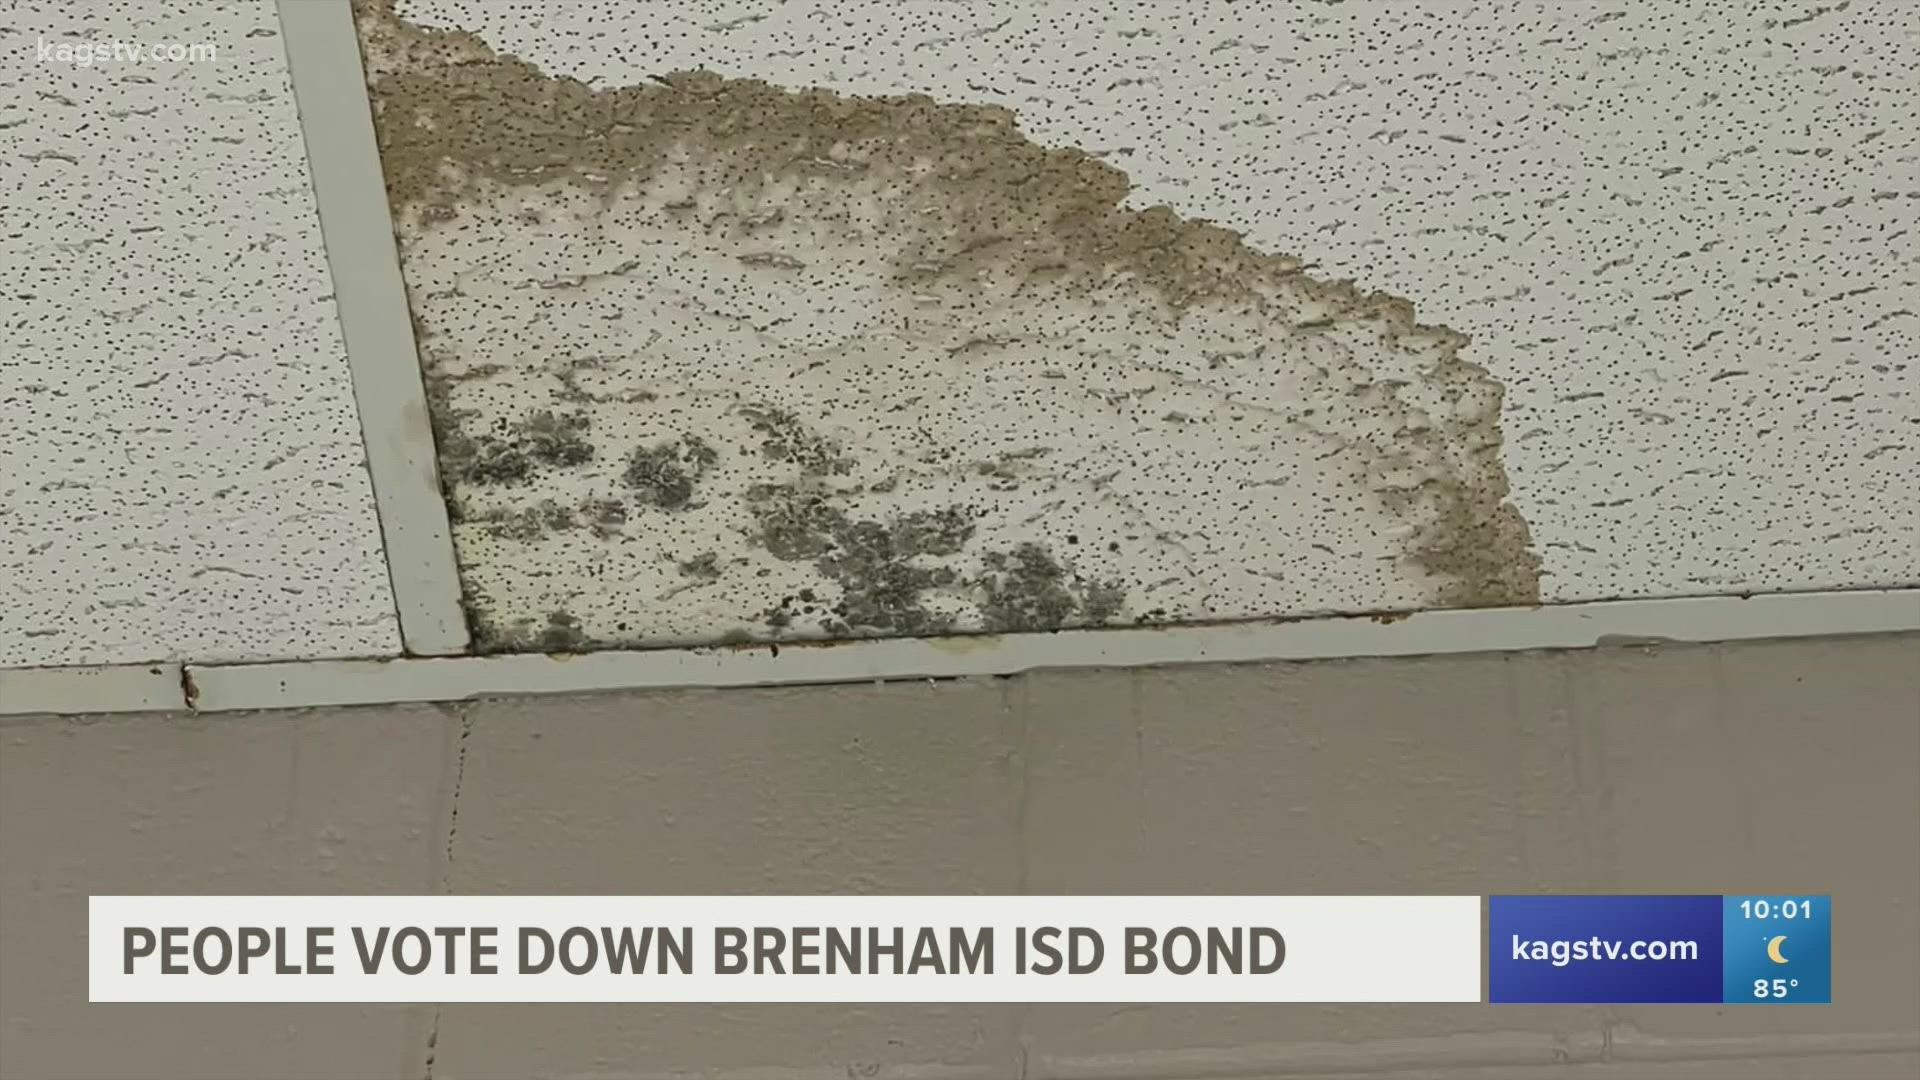 While Brenham ISD's bond failed, some voters said it's not for reasons you may think at first.